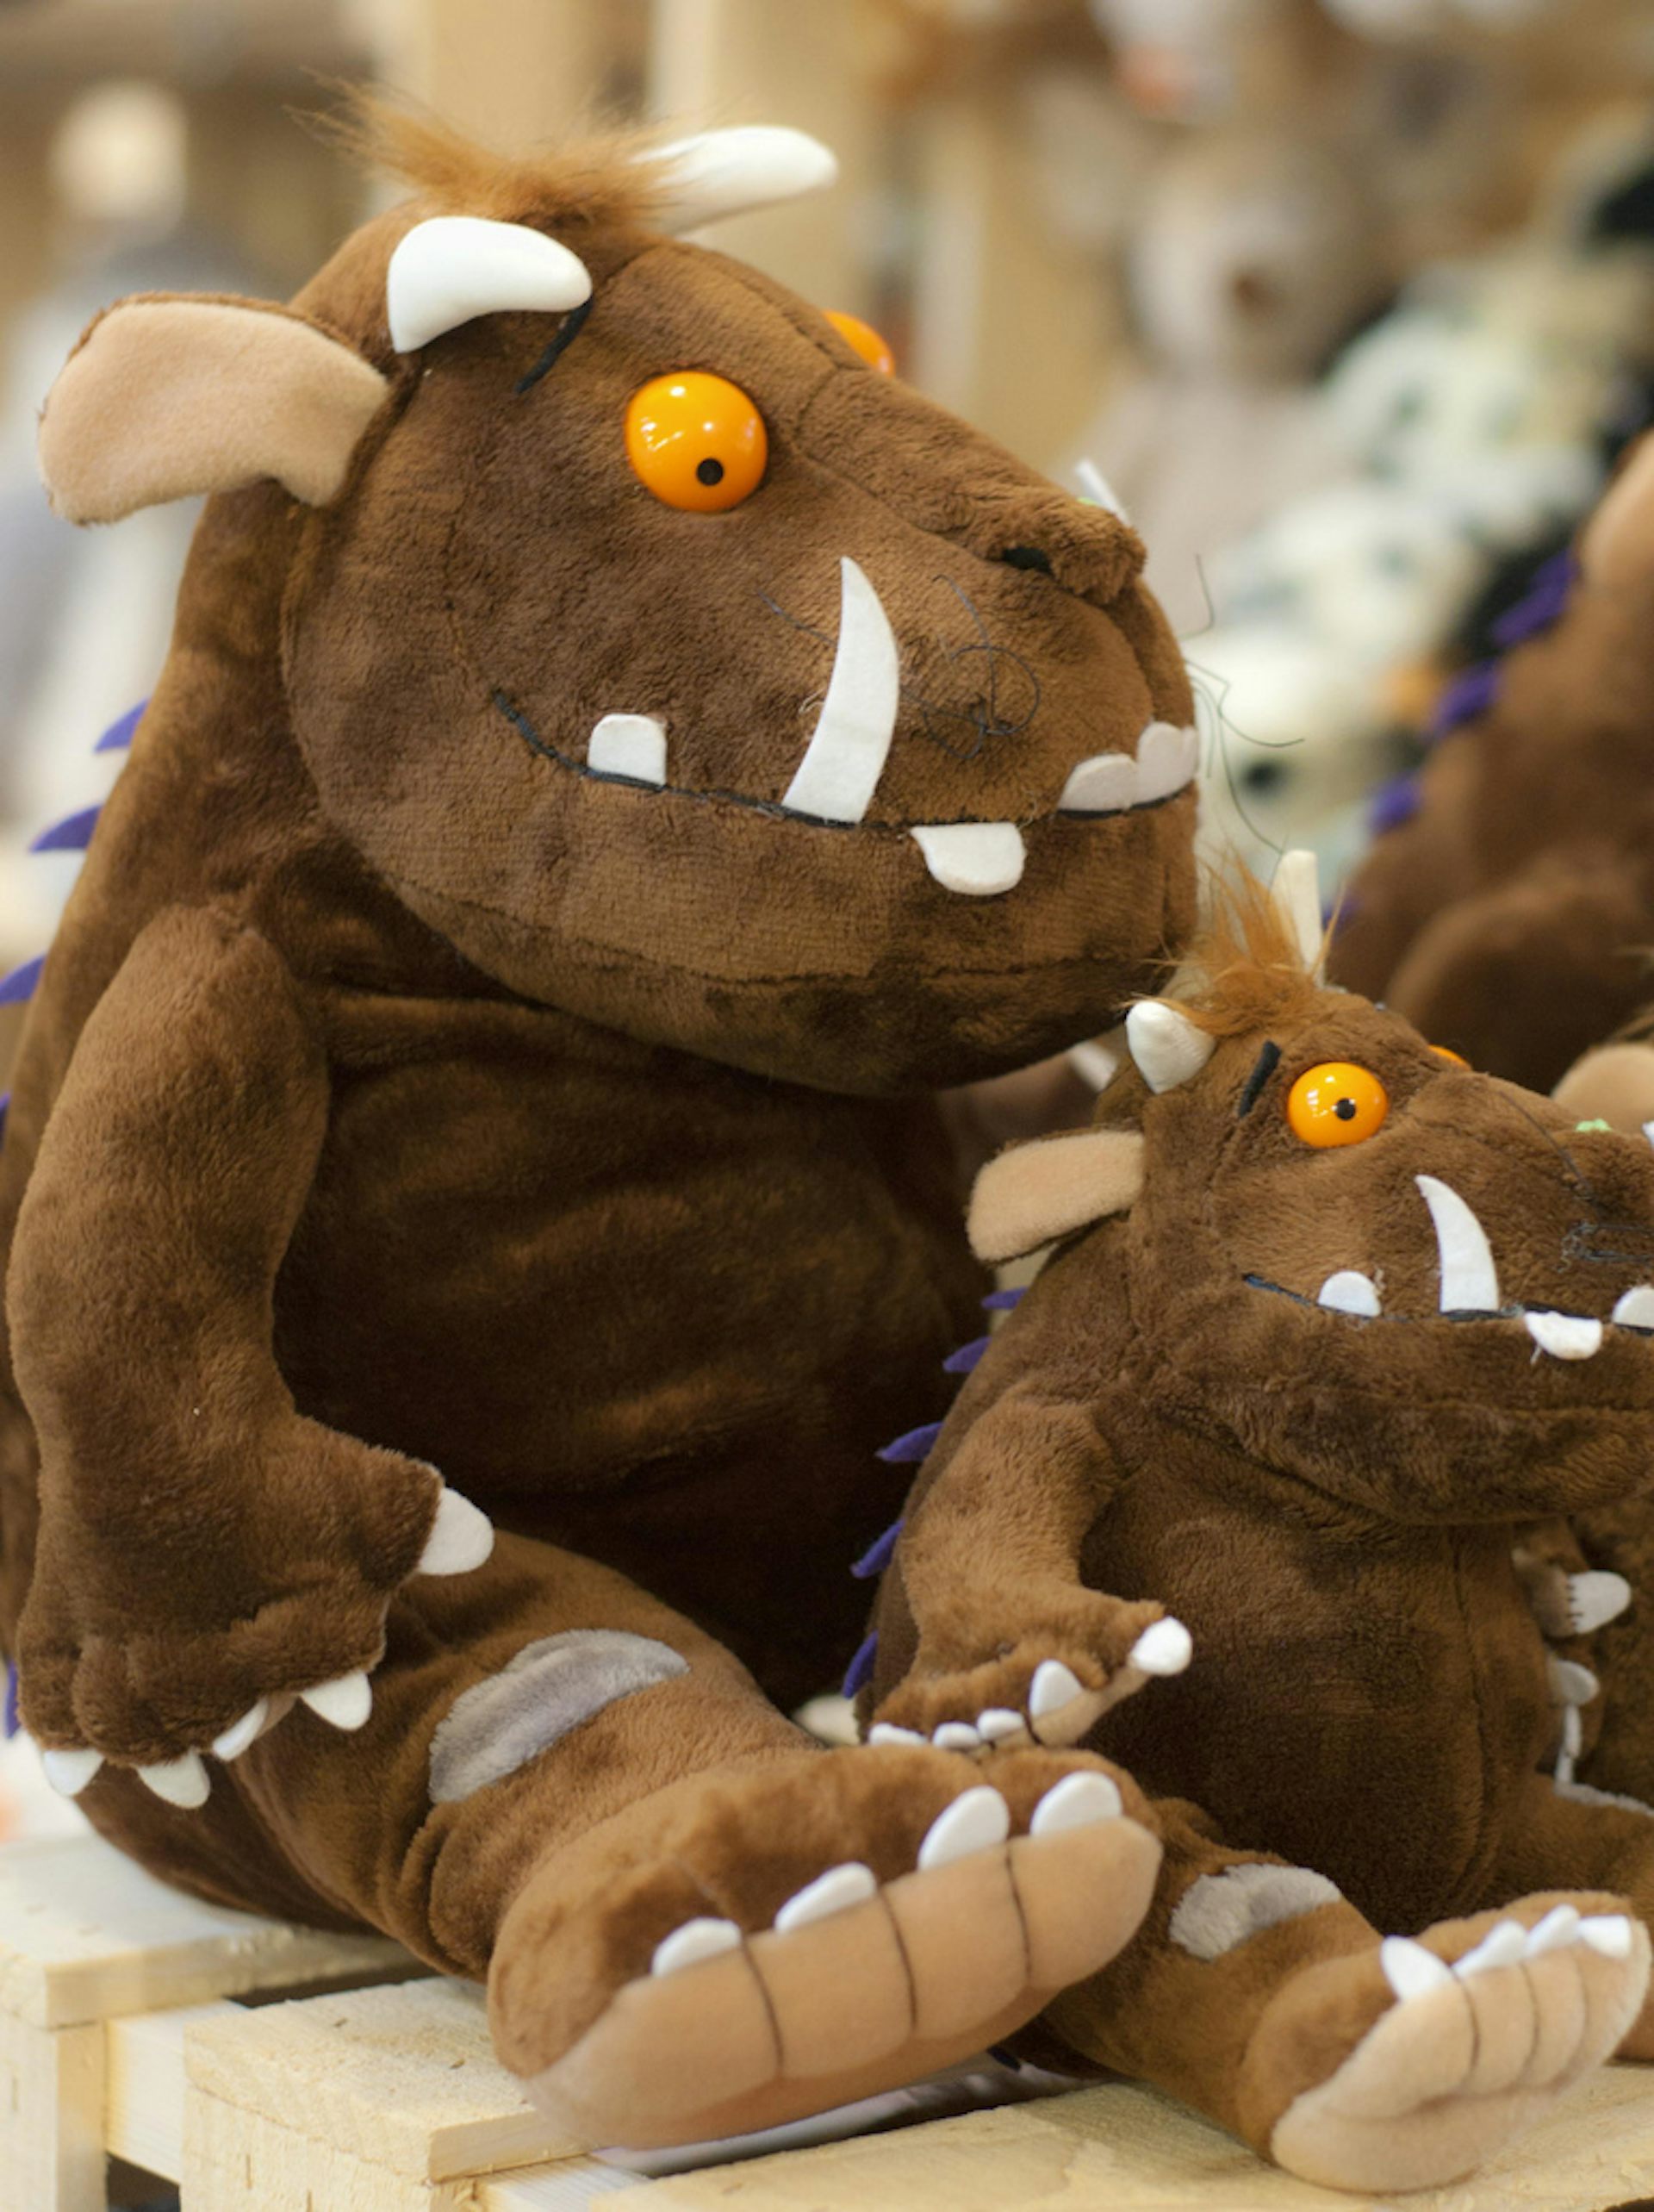 the gruffalo book and toy